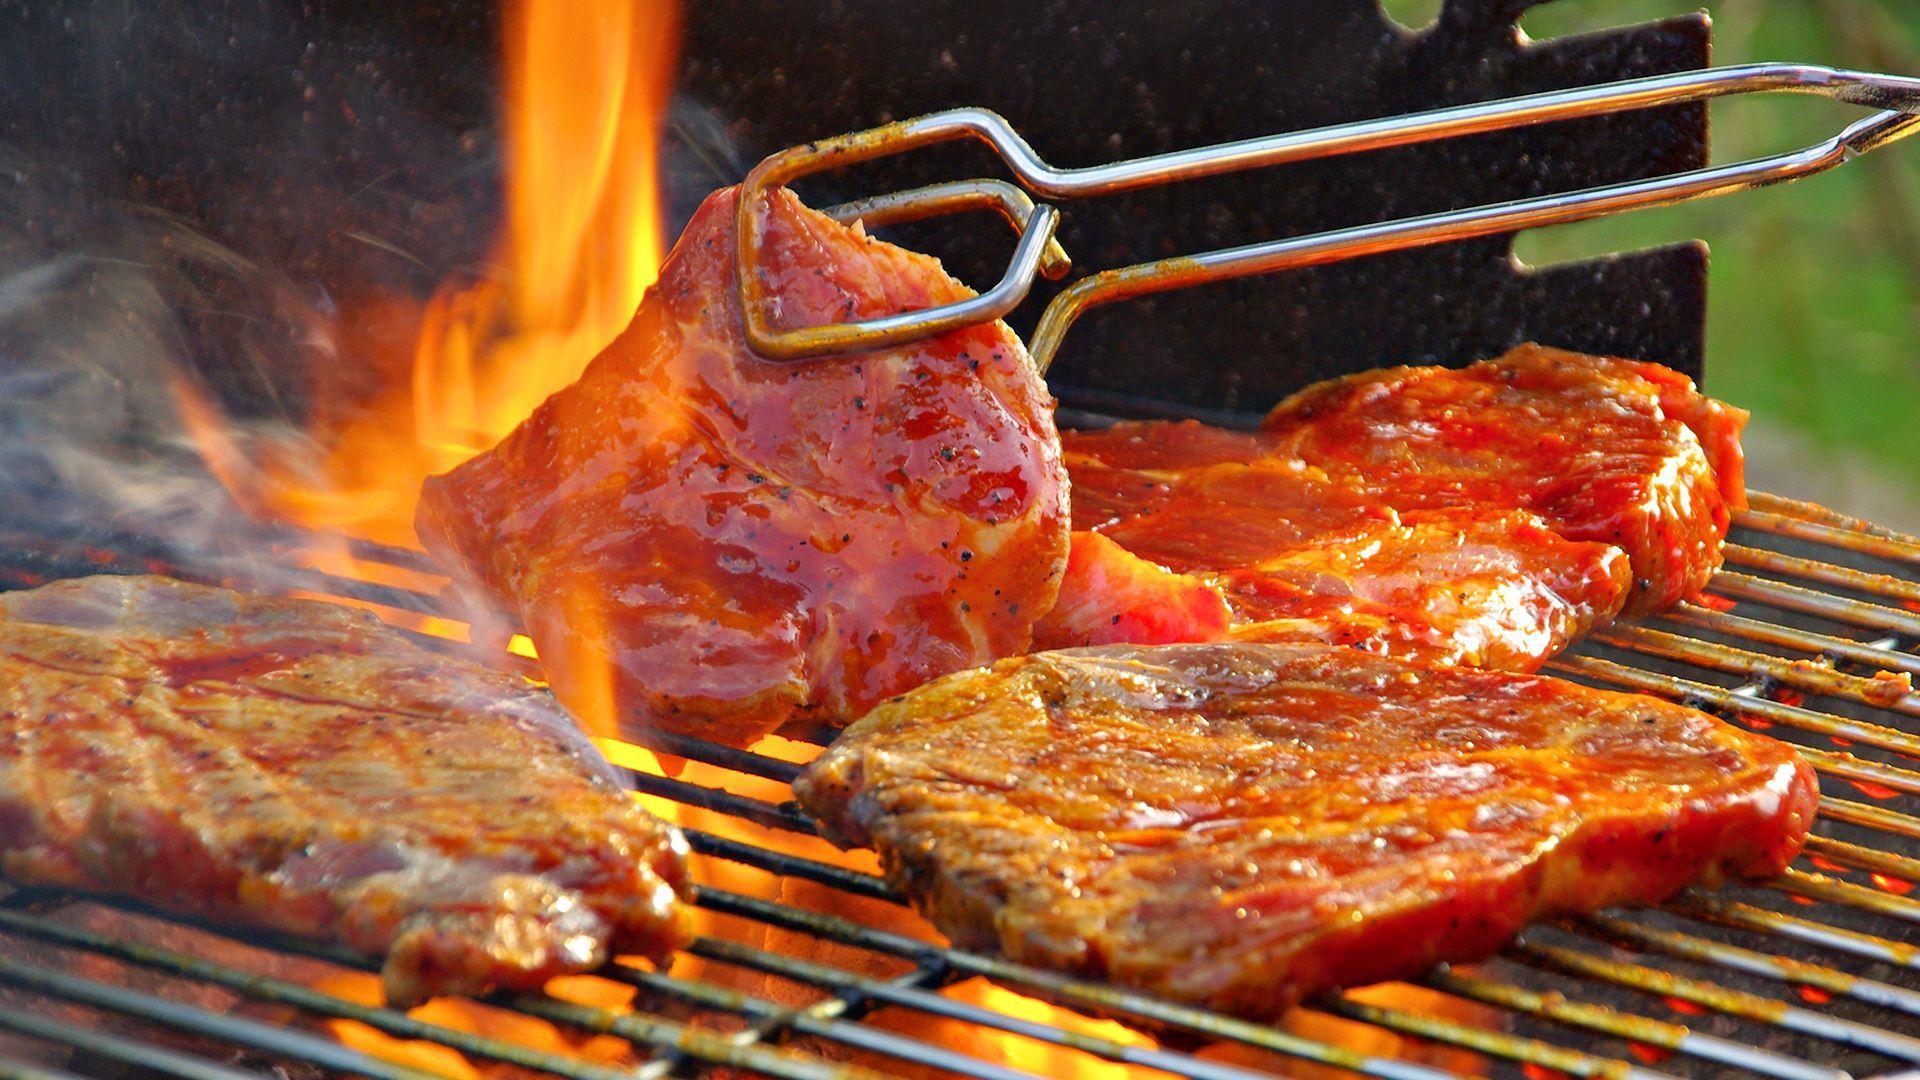 Desktop Wallpaper Grilled Meat And Barbecue. Photo